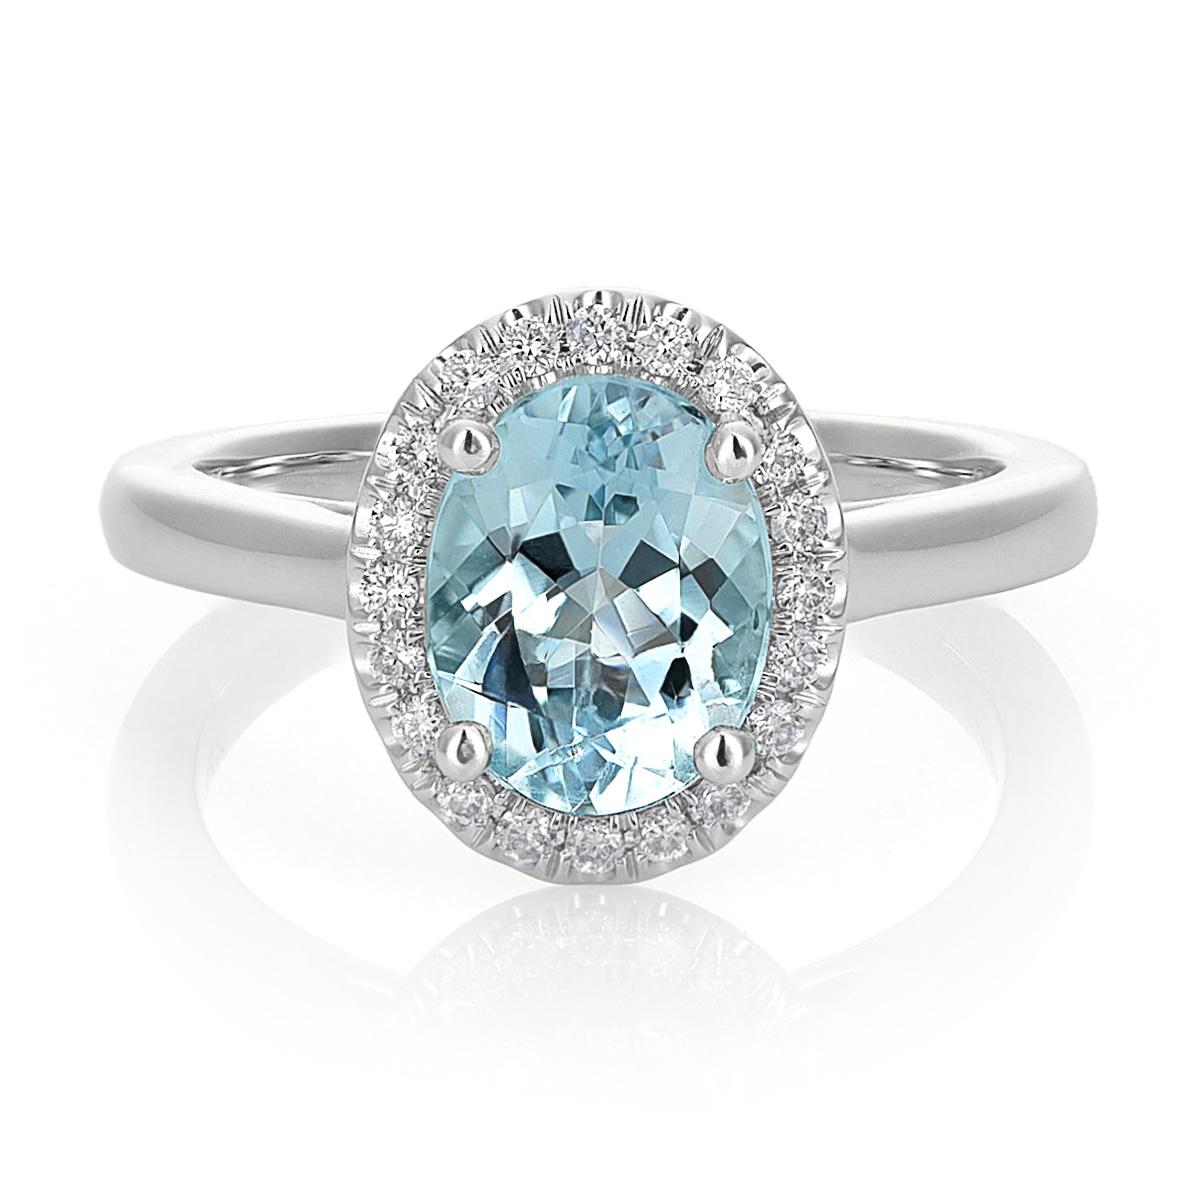 1.46 Carats Natural Aquamarine Diamonds set in 14K White Gold In New Condition For Sale In Los Angeles, CA